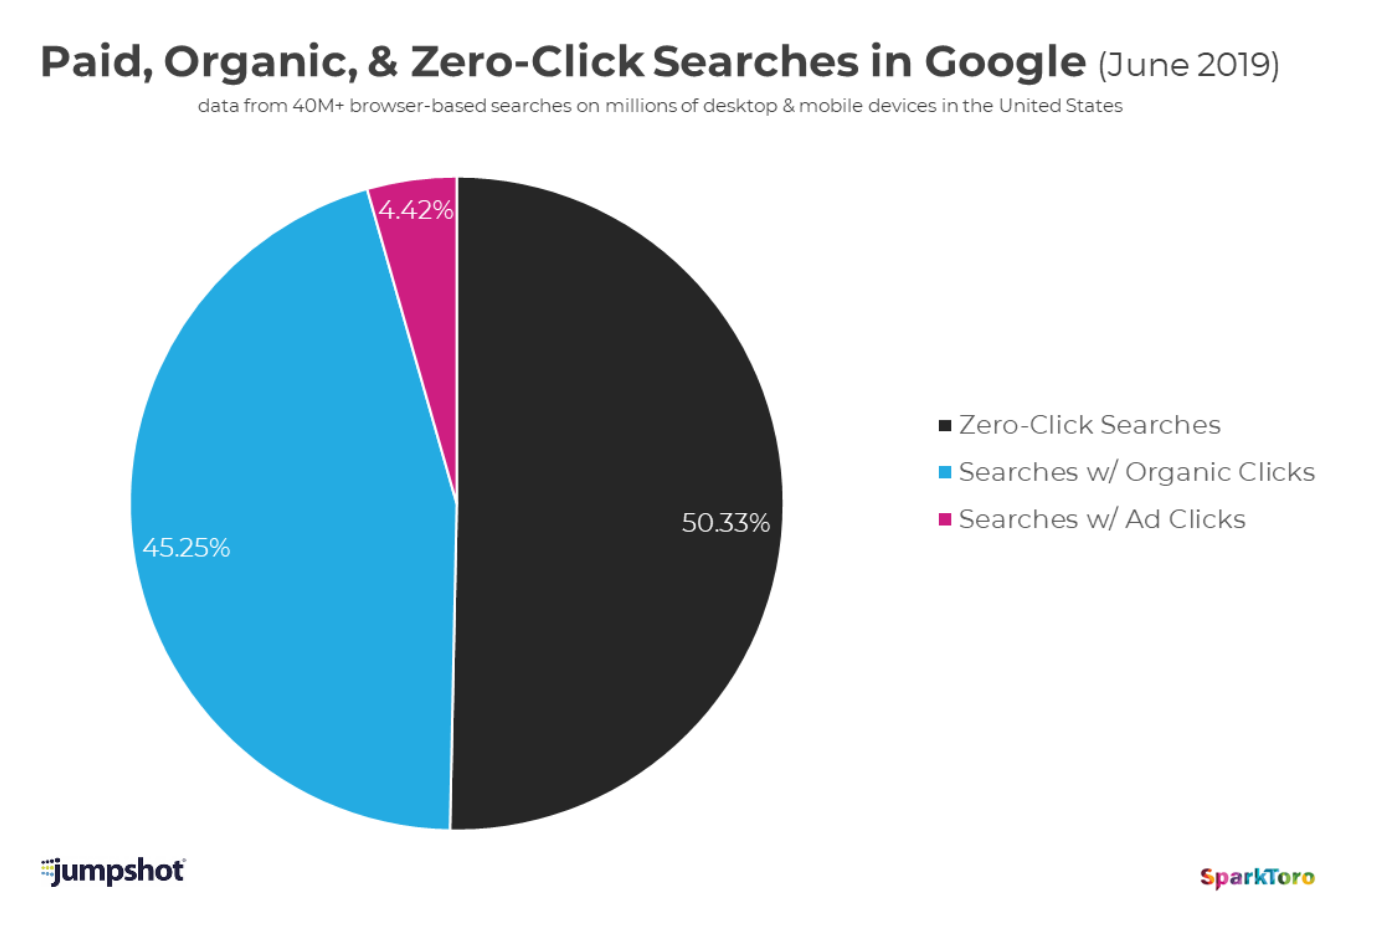 chart showing paid, organic, and zero-click searches in google.